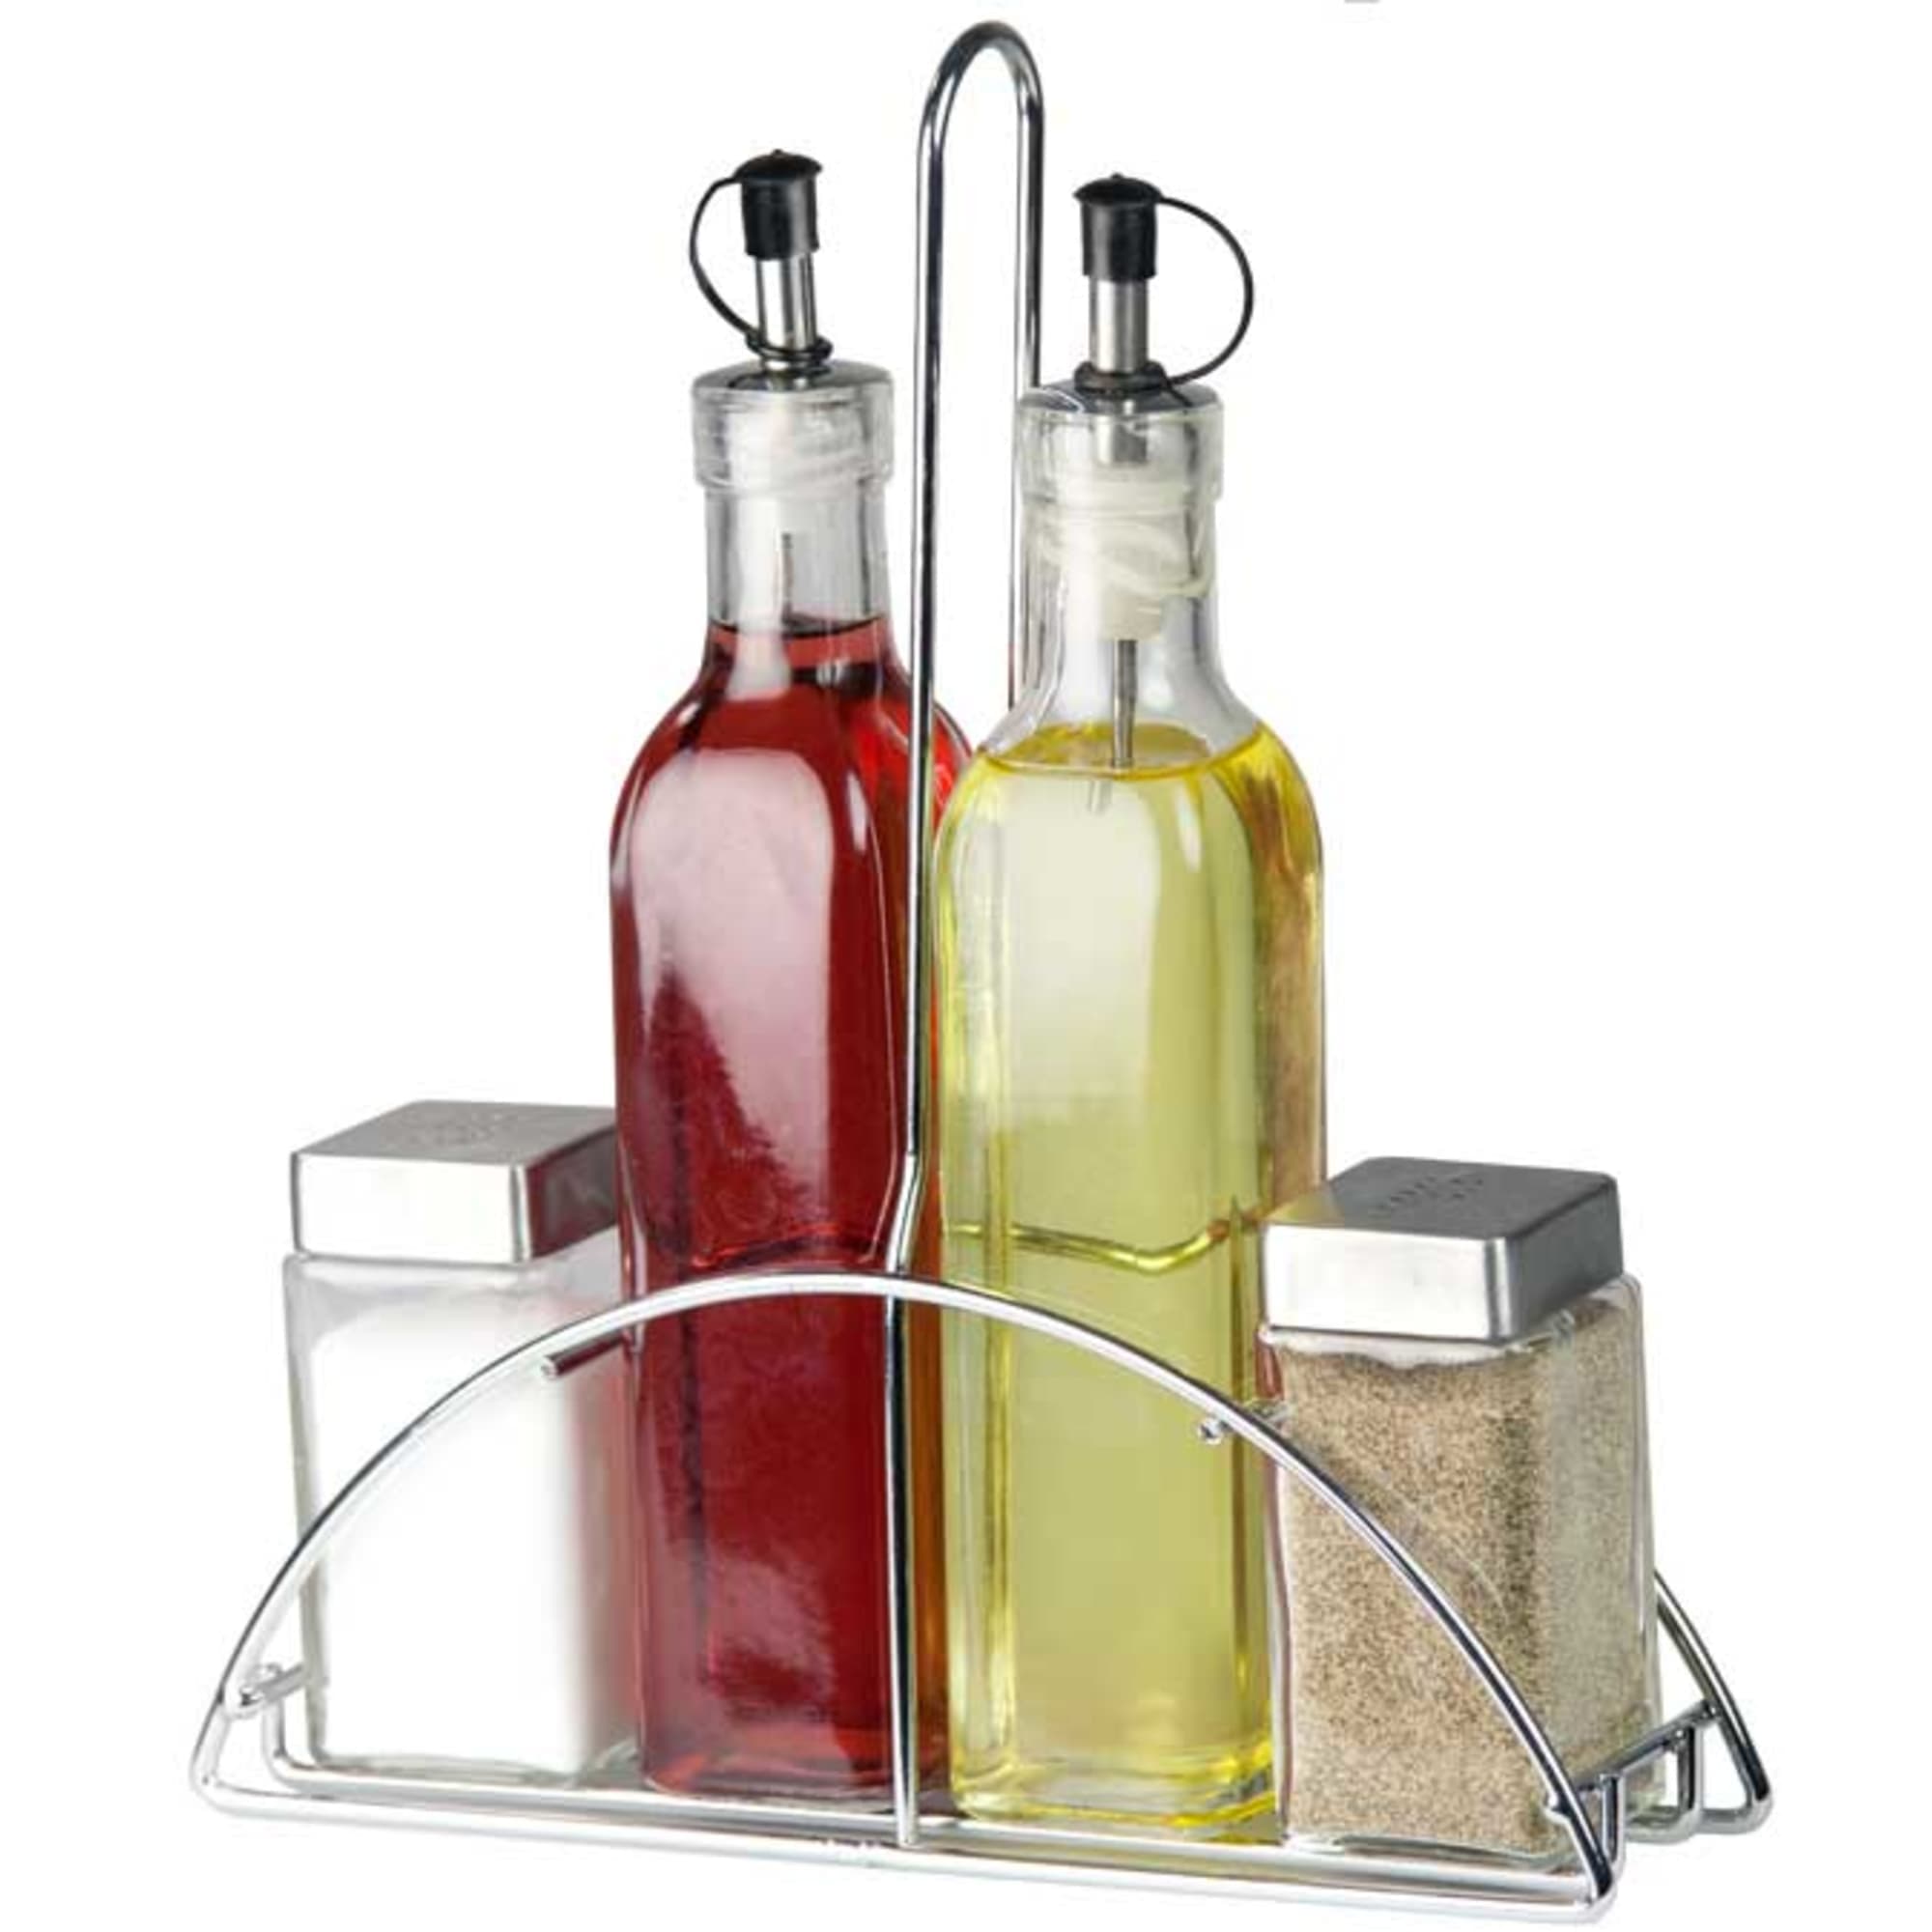 Home Basics 5 Piece Cruet Set with Stand $6.00 EACH, CASE PACK OF 12